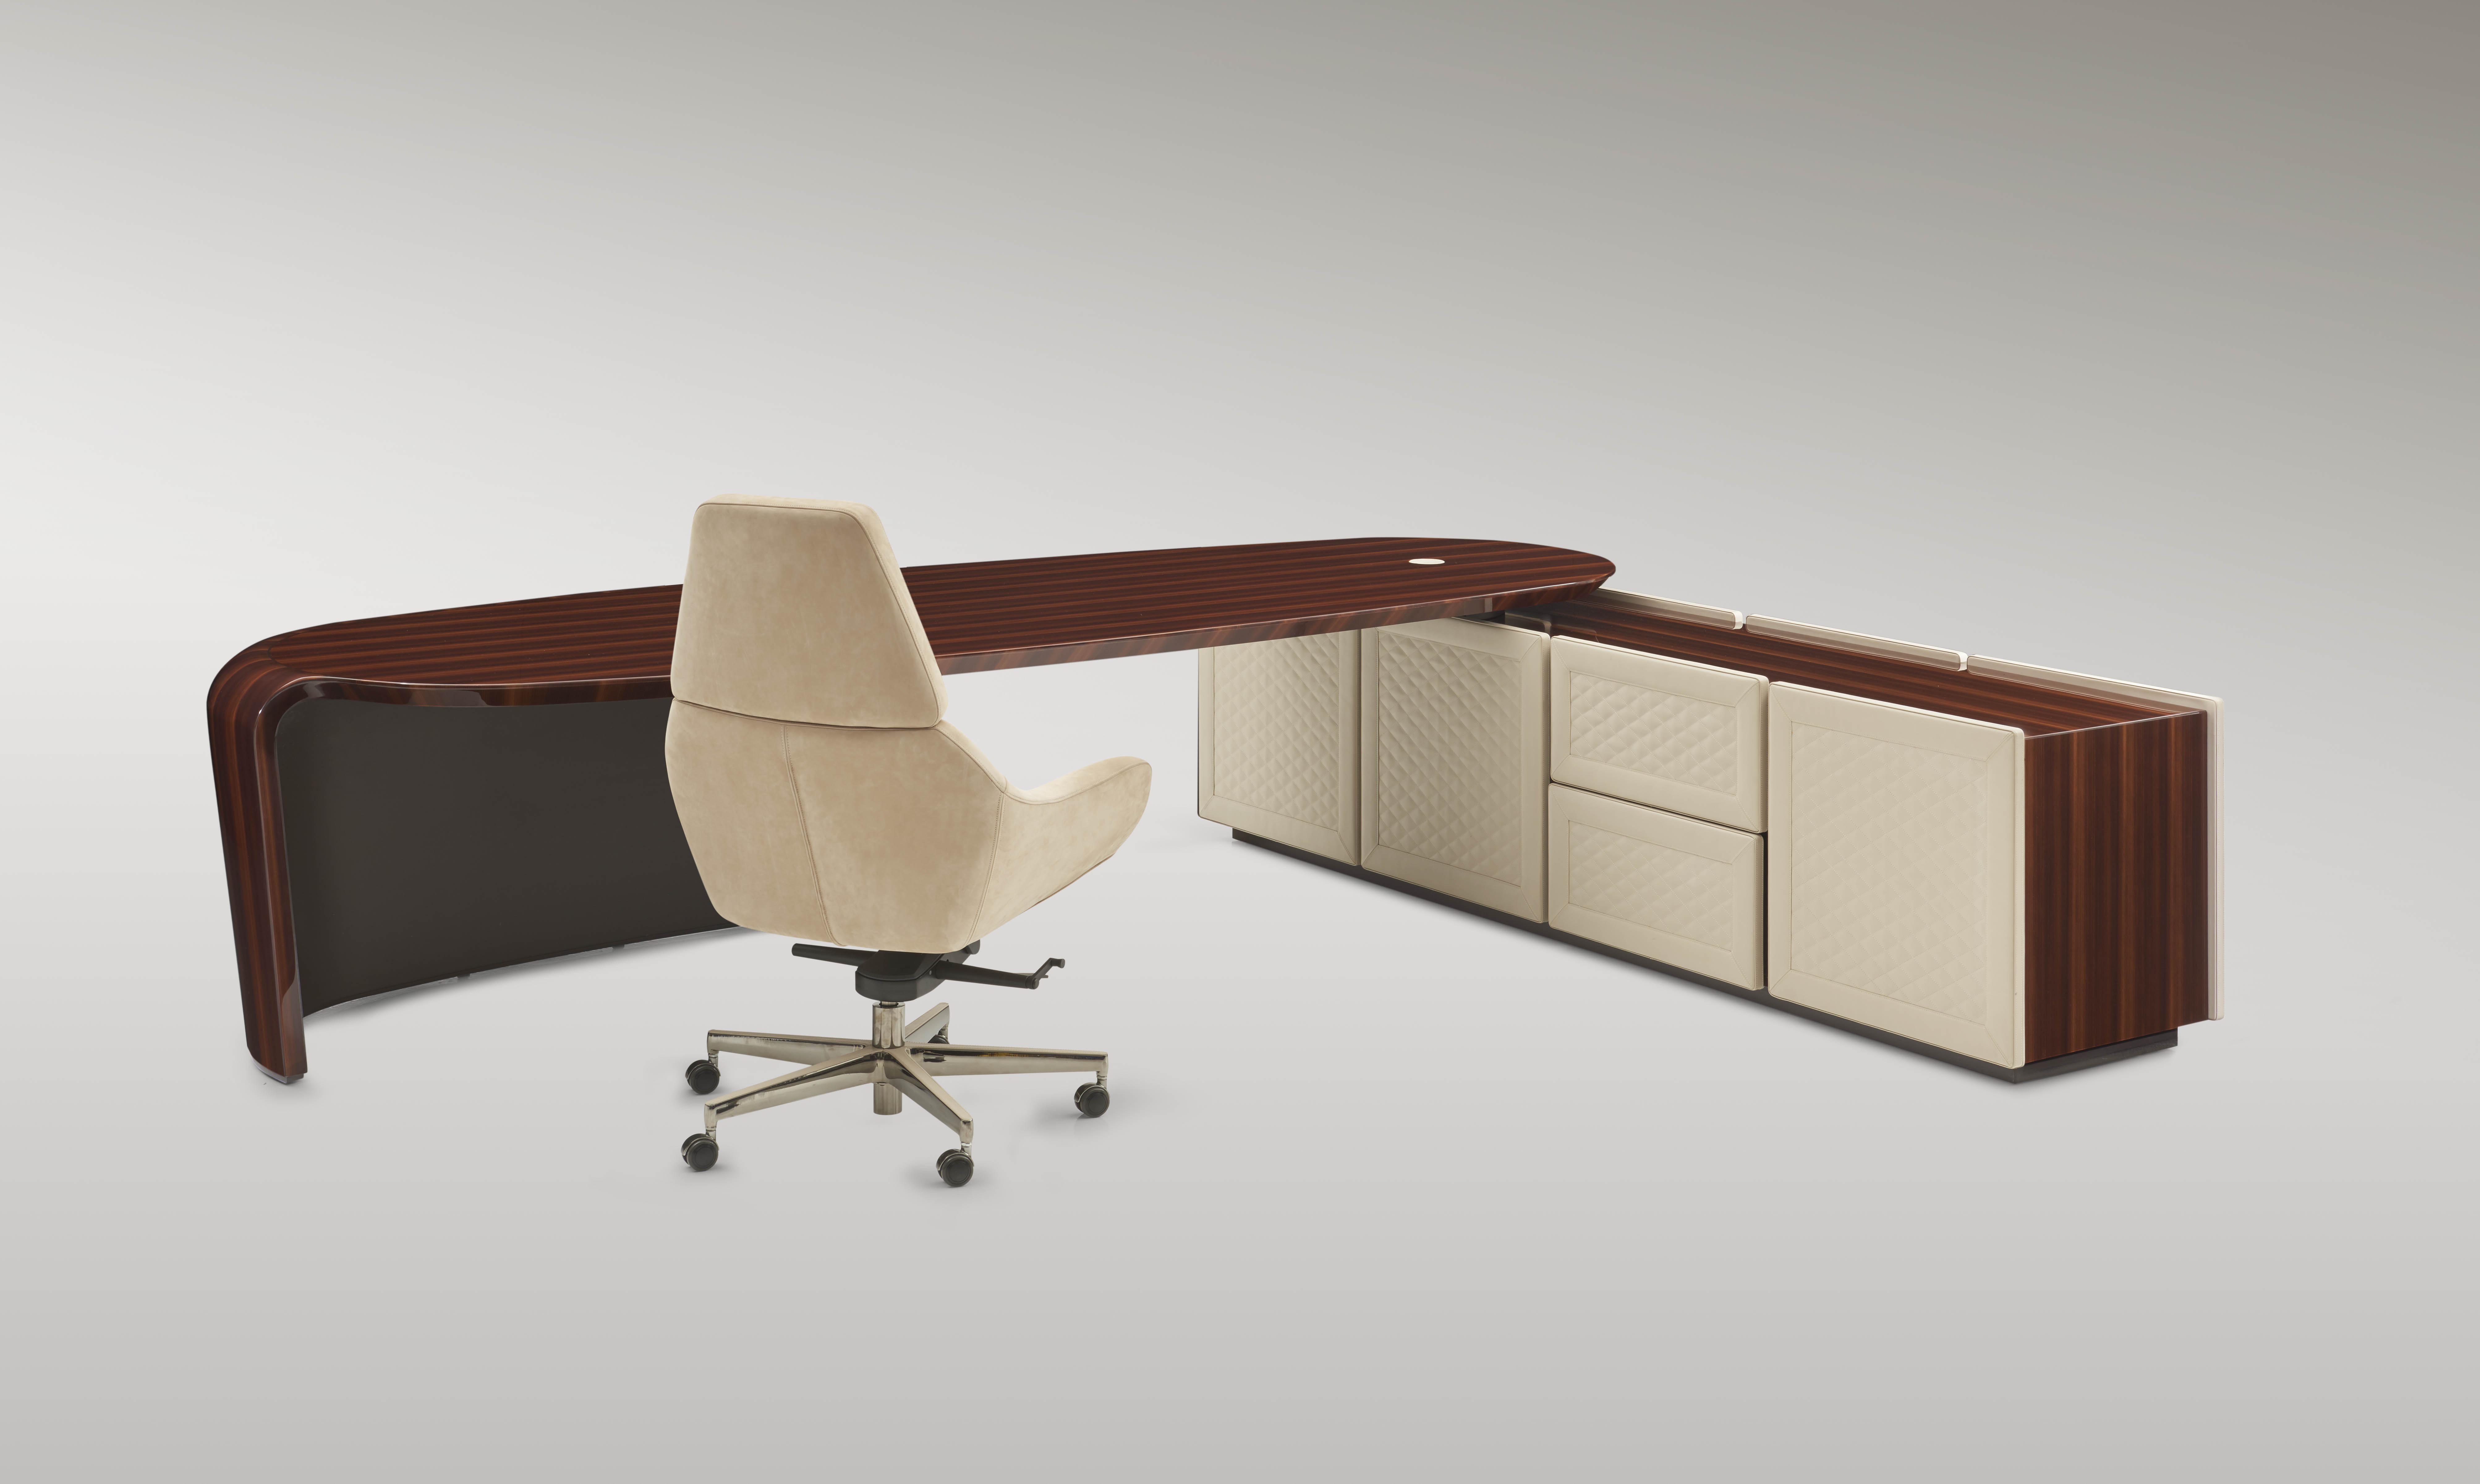 Bentley Home Launches an Iconic Writing Desk & Office Chair